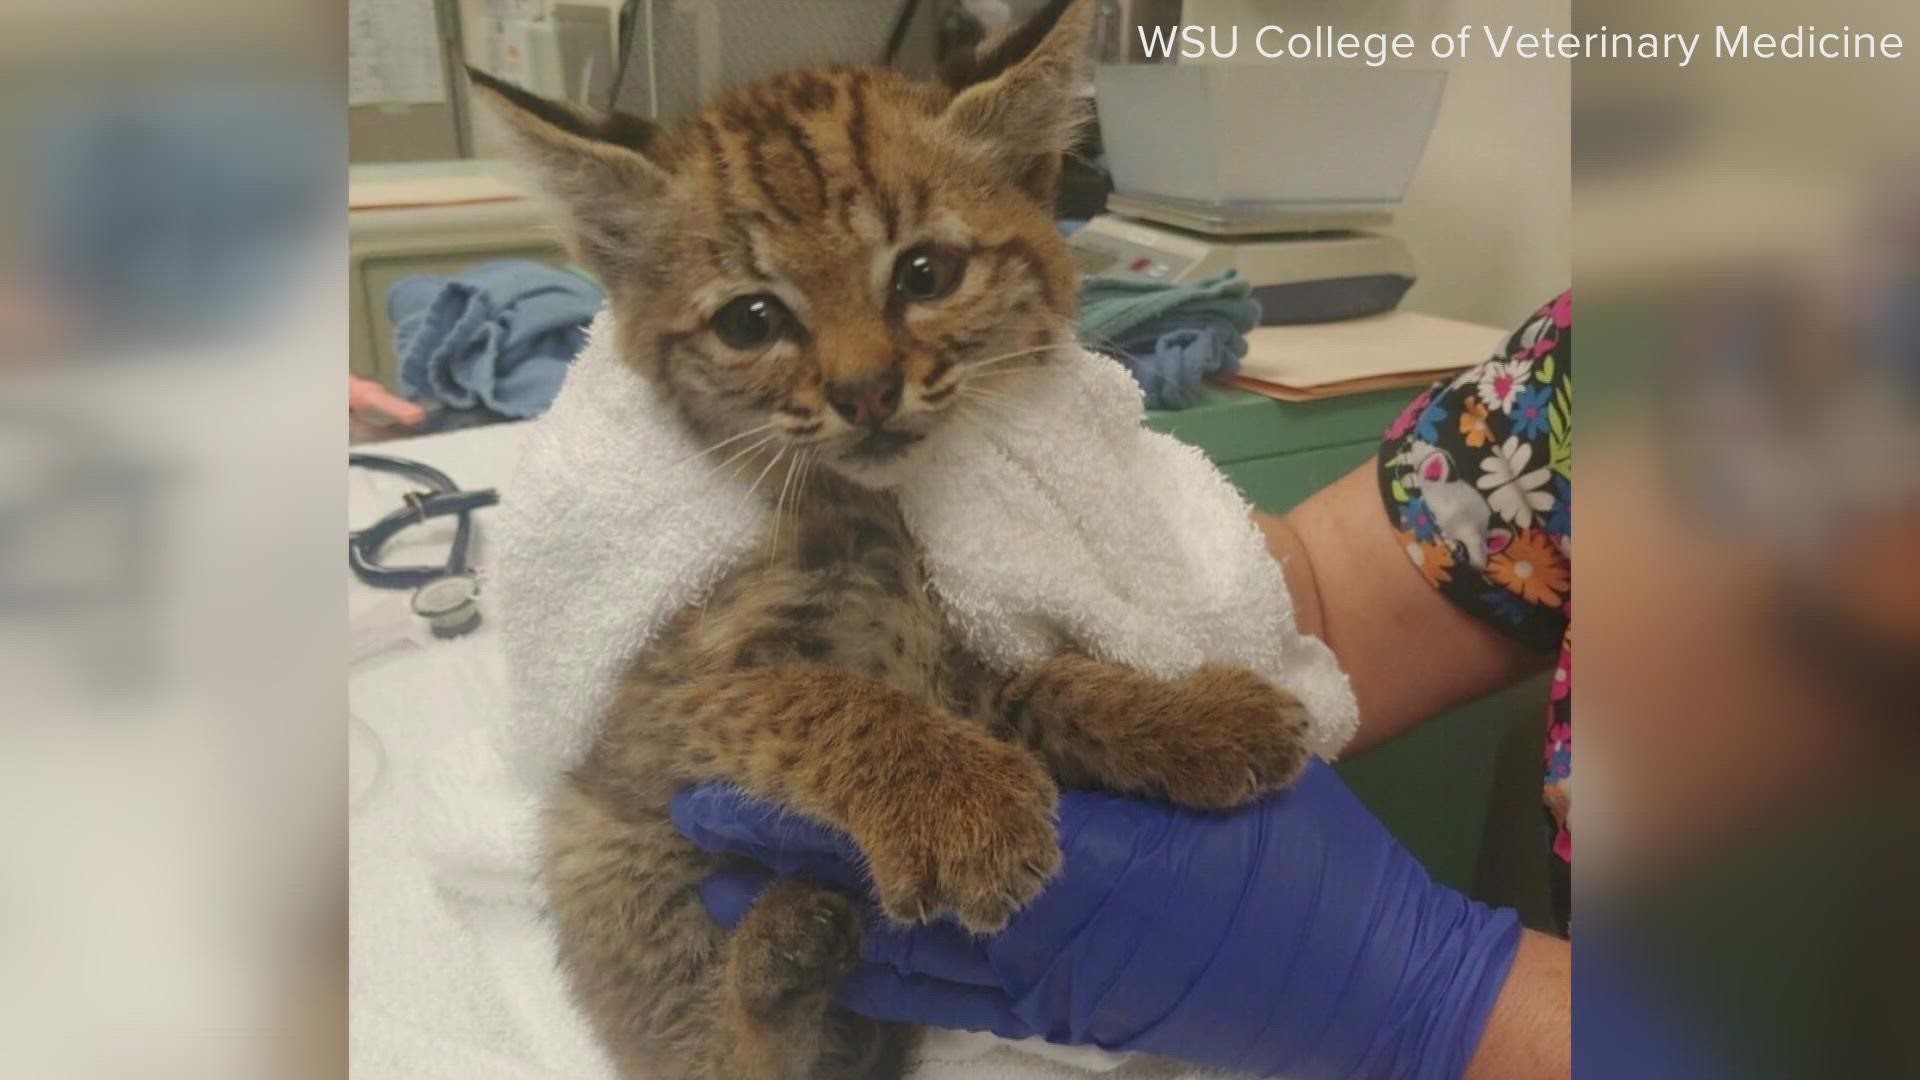 One-month-old baby bobcat was brought to the vets at WSU after she was found near Orofino, dehydrated, malnourished and severely underweight alongside a road.